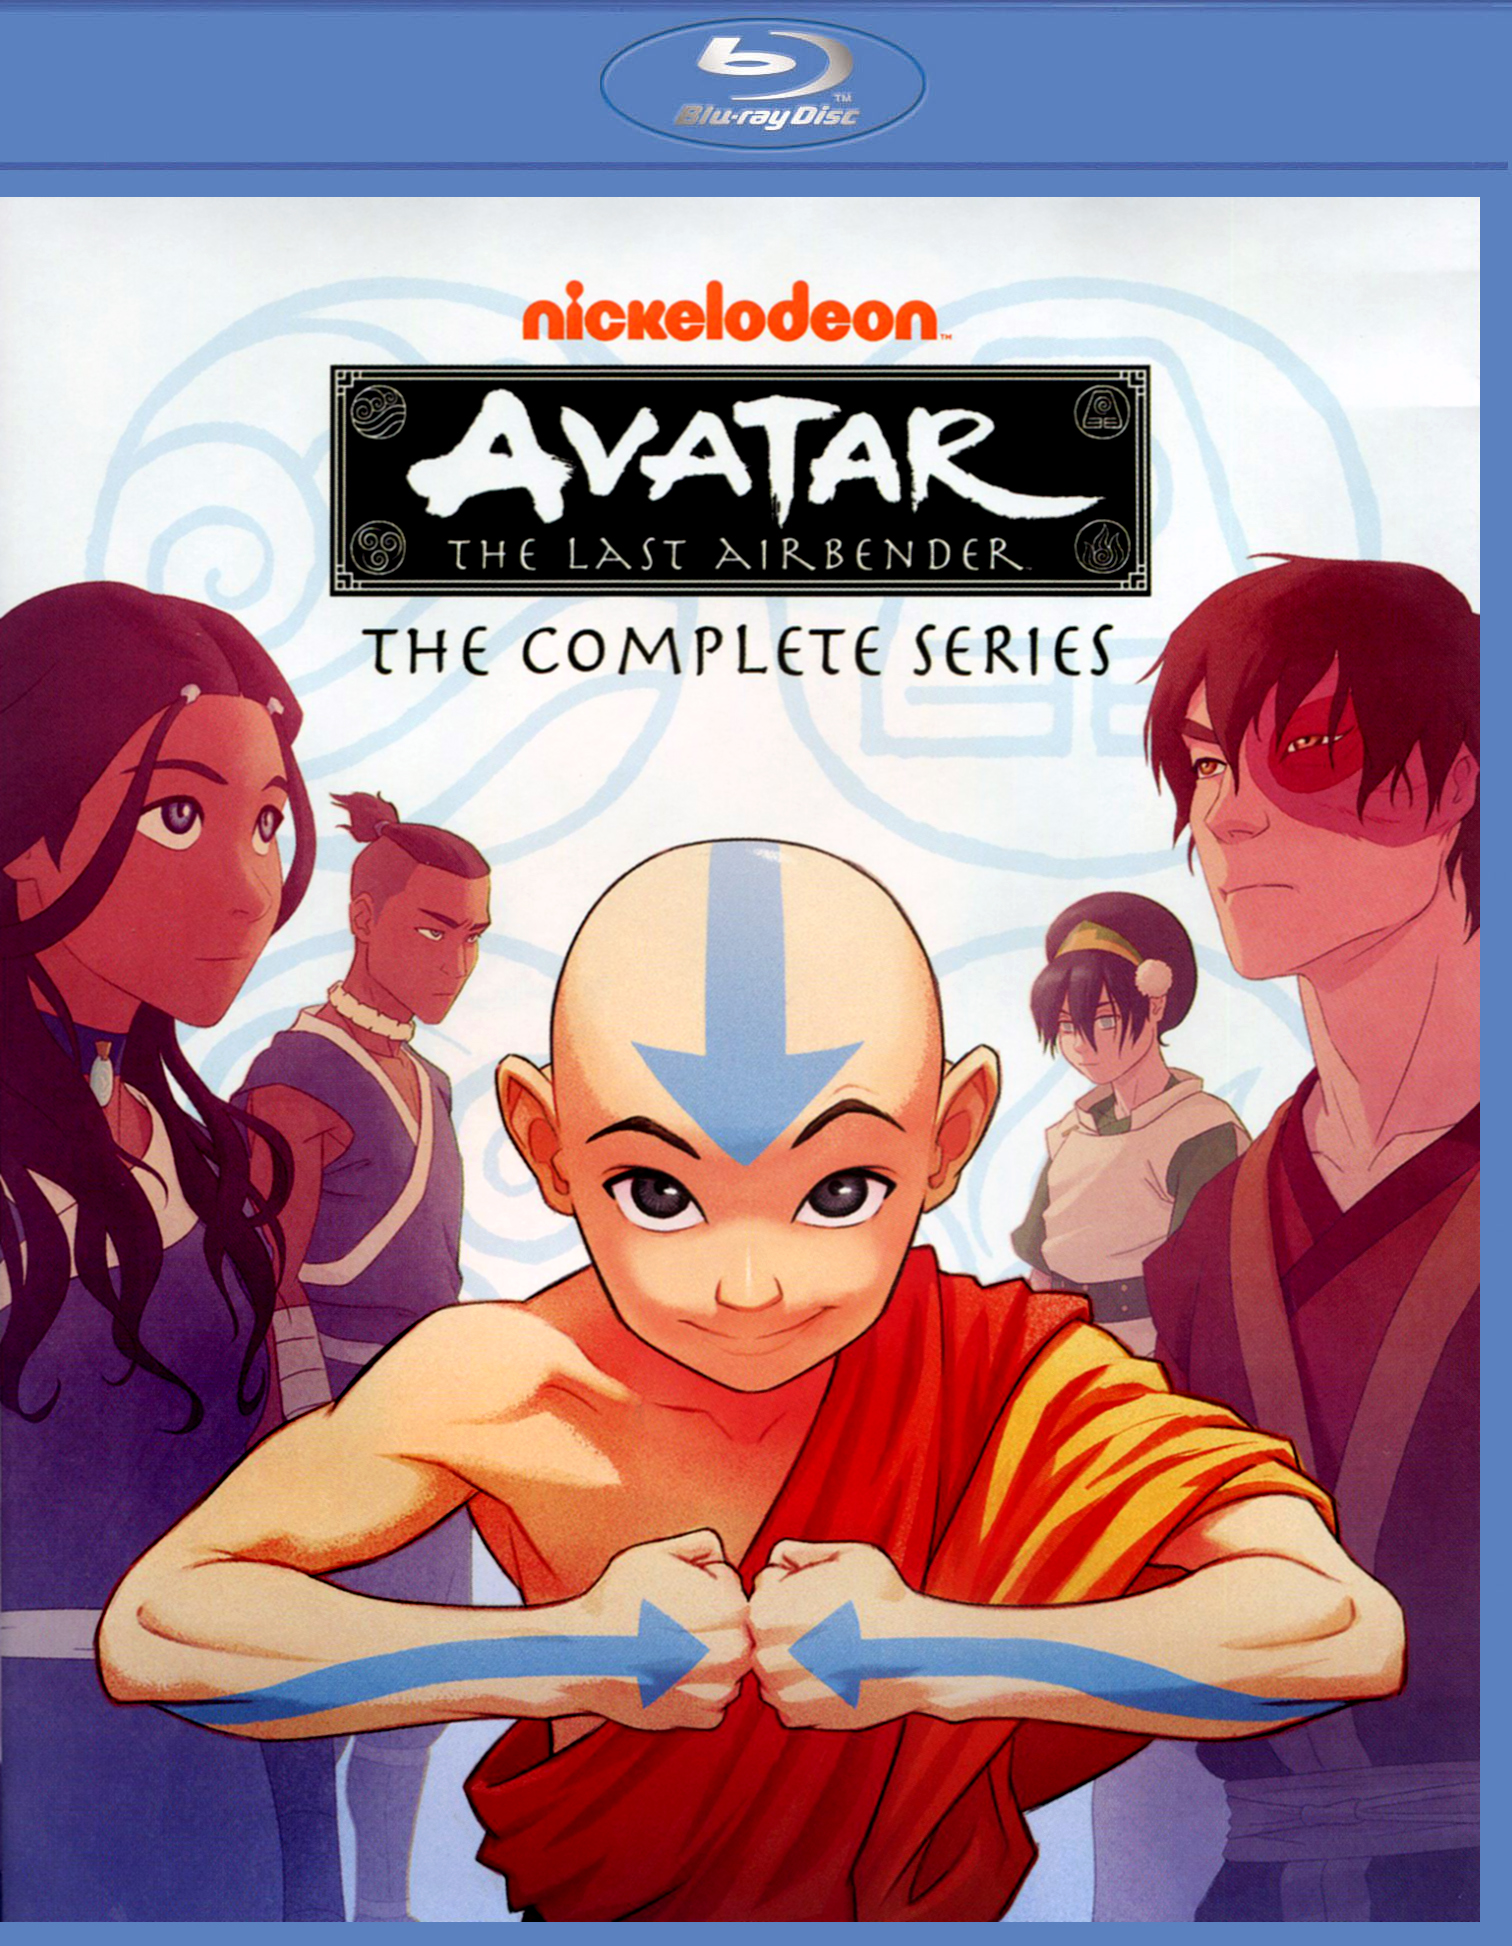 Avatar: The Last Airbender The Complete Series [Blu-ray] - Best Buy